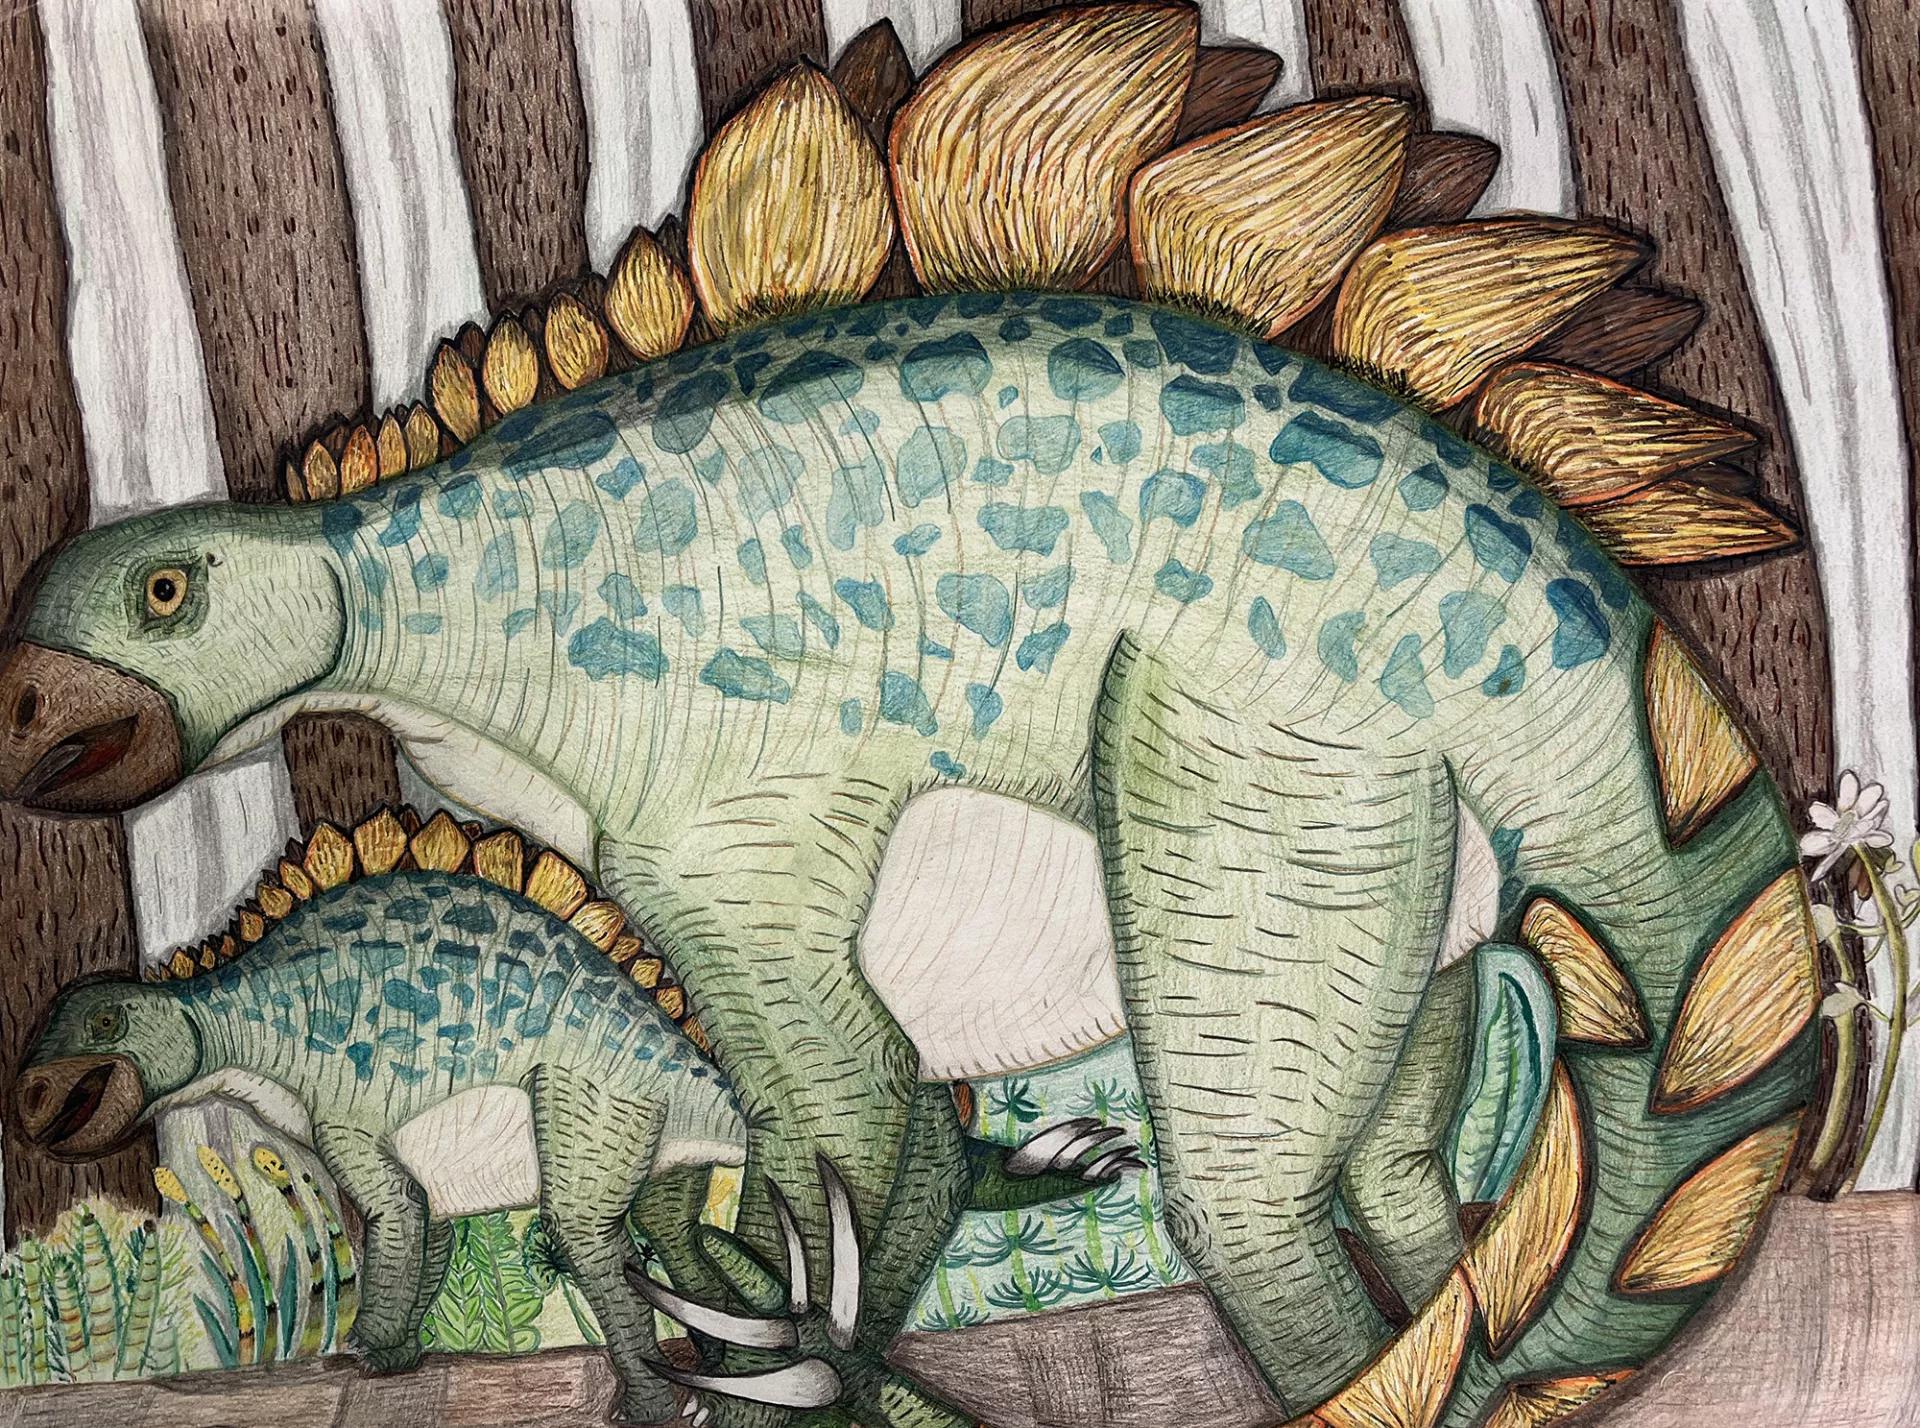 Jenna Greene Stegosaurus Lived in the Cretaceous Forest, 2022 This colorful drawing features two dinosaurs, a big Stegosaurus fills the image and a second smaller one is in the background. In shades of green with yellow, they stand amid the giant trunks of prehistoric trees. The shading and detailing on the dinosaurs and the environment that surrounds them gives this picture great presence.  Colored pencil on paper, 18” x 24”